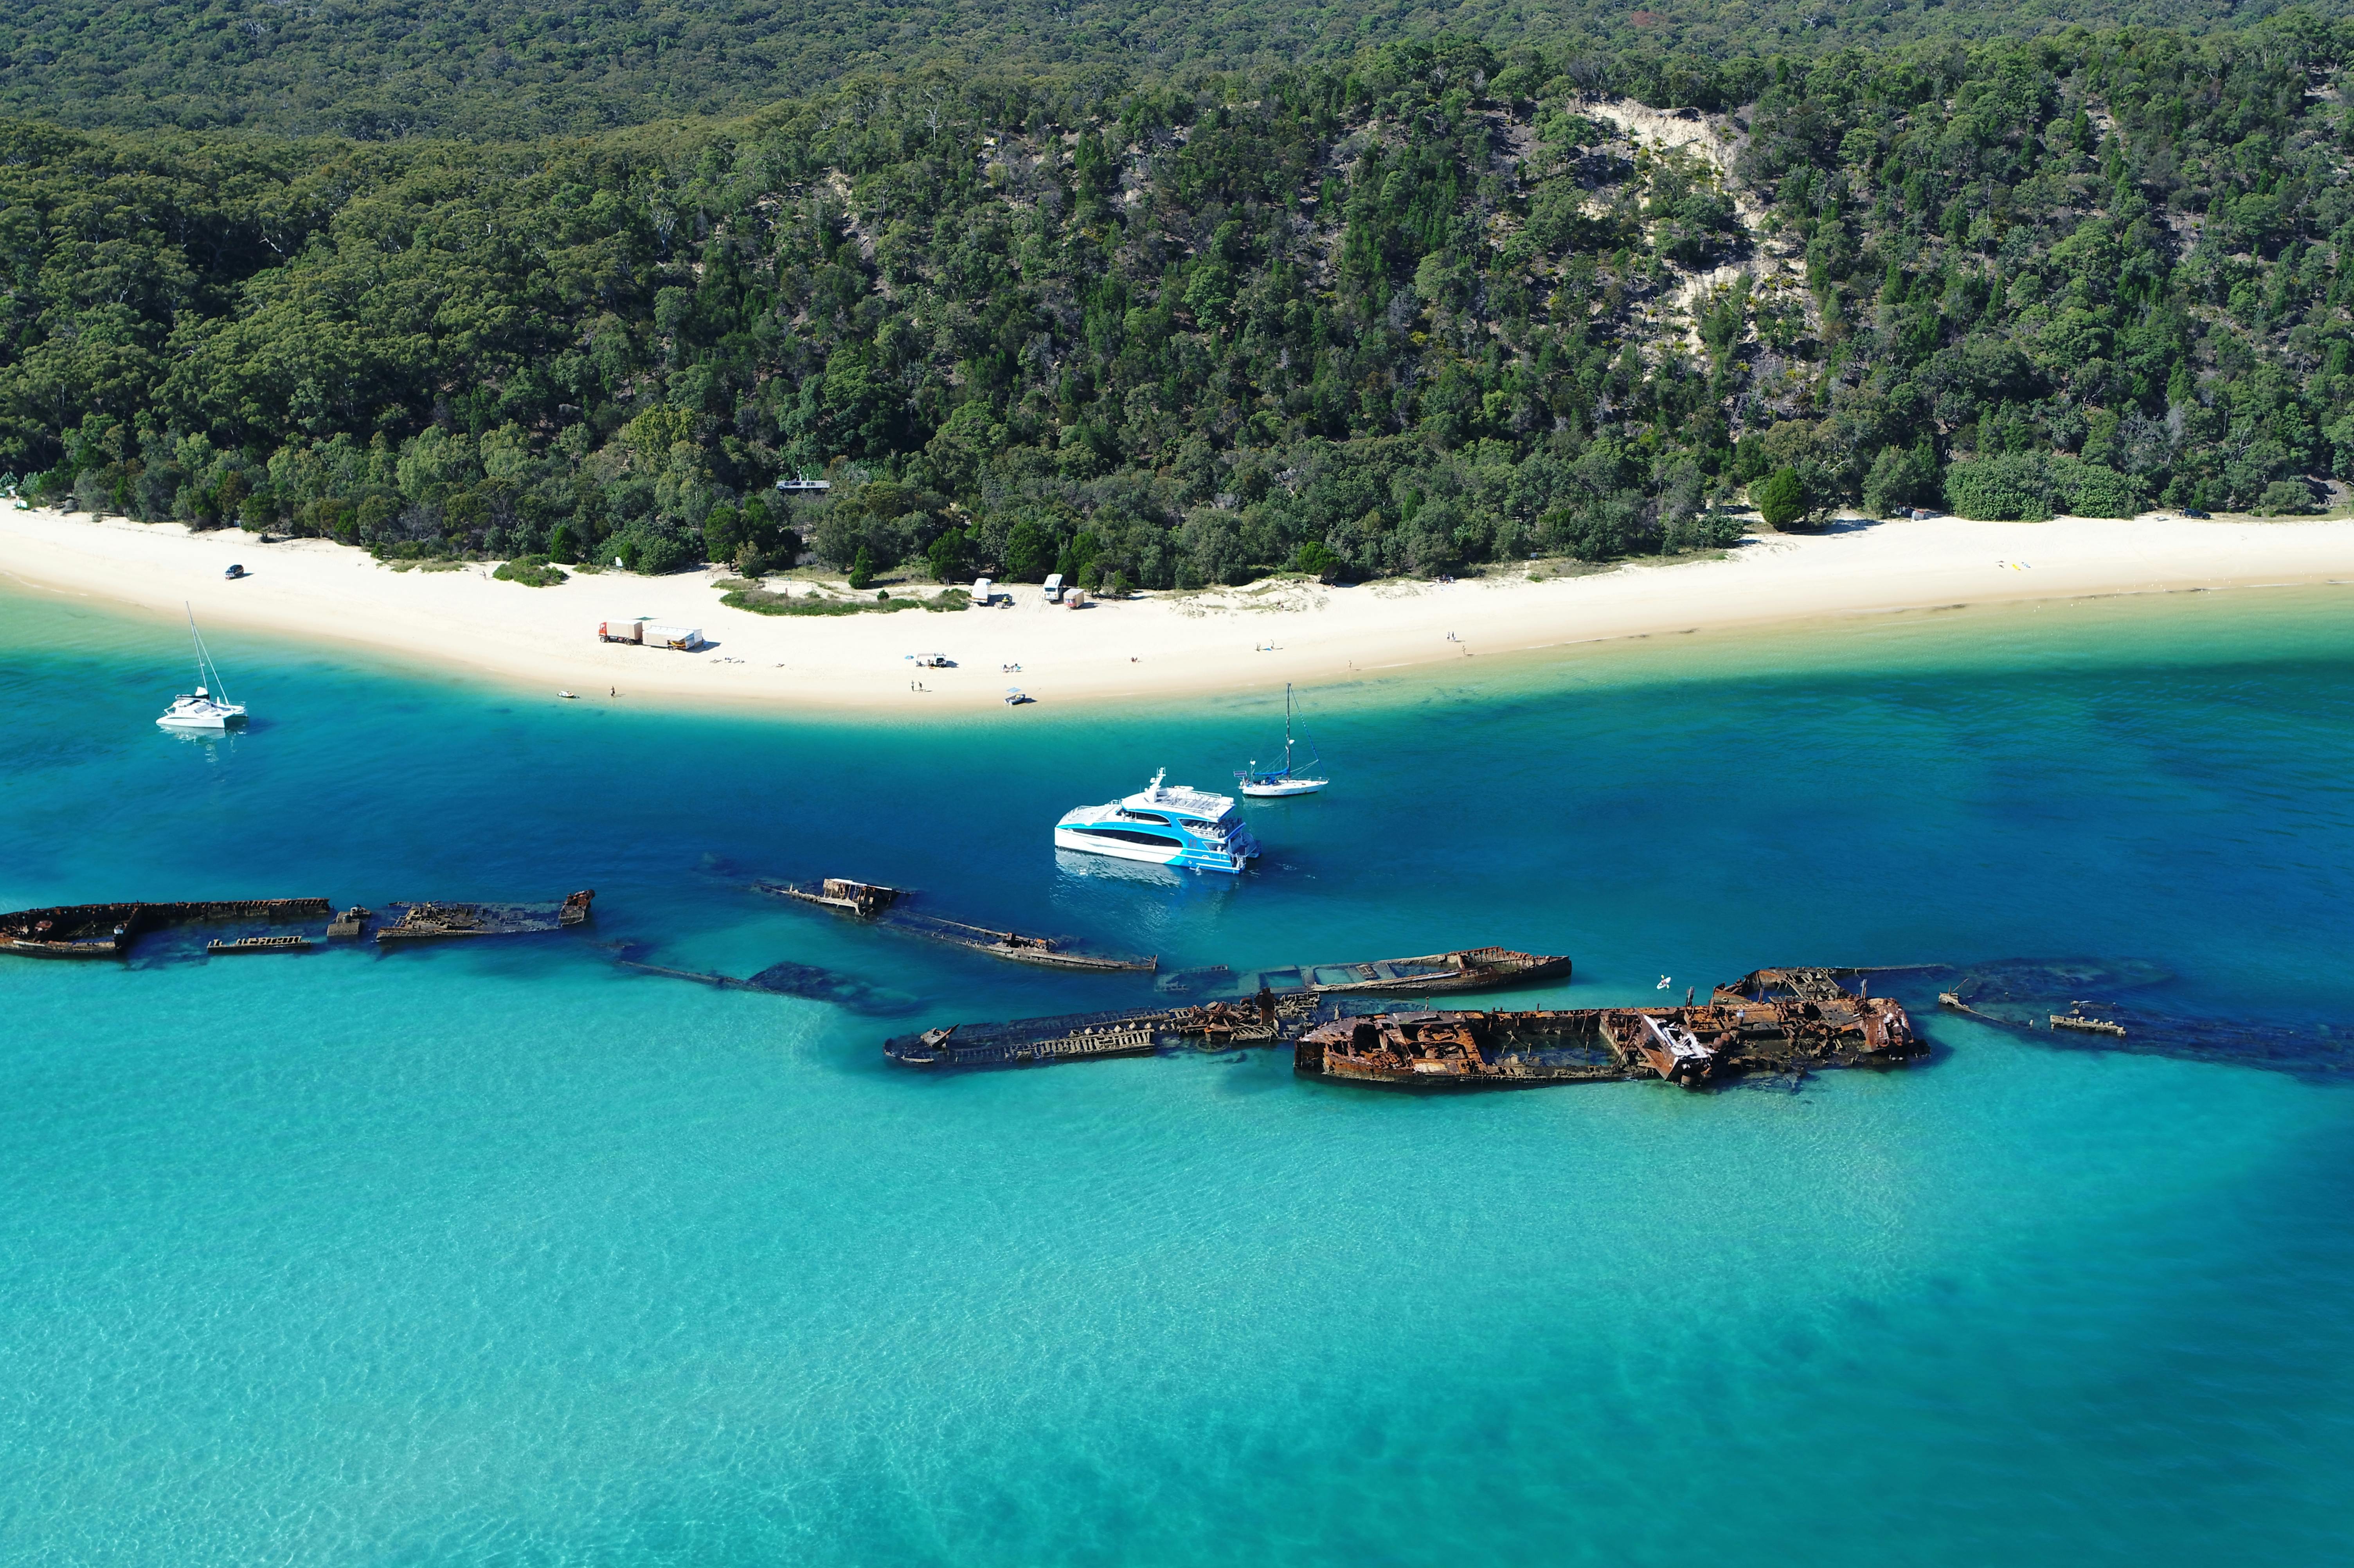 Moreton Bay Marine Park full-day tour with transfer from Gold Coast Musement